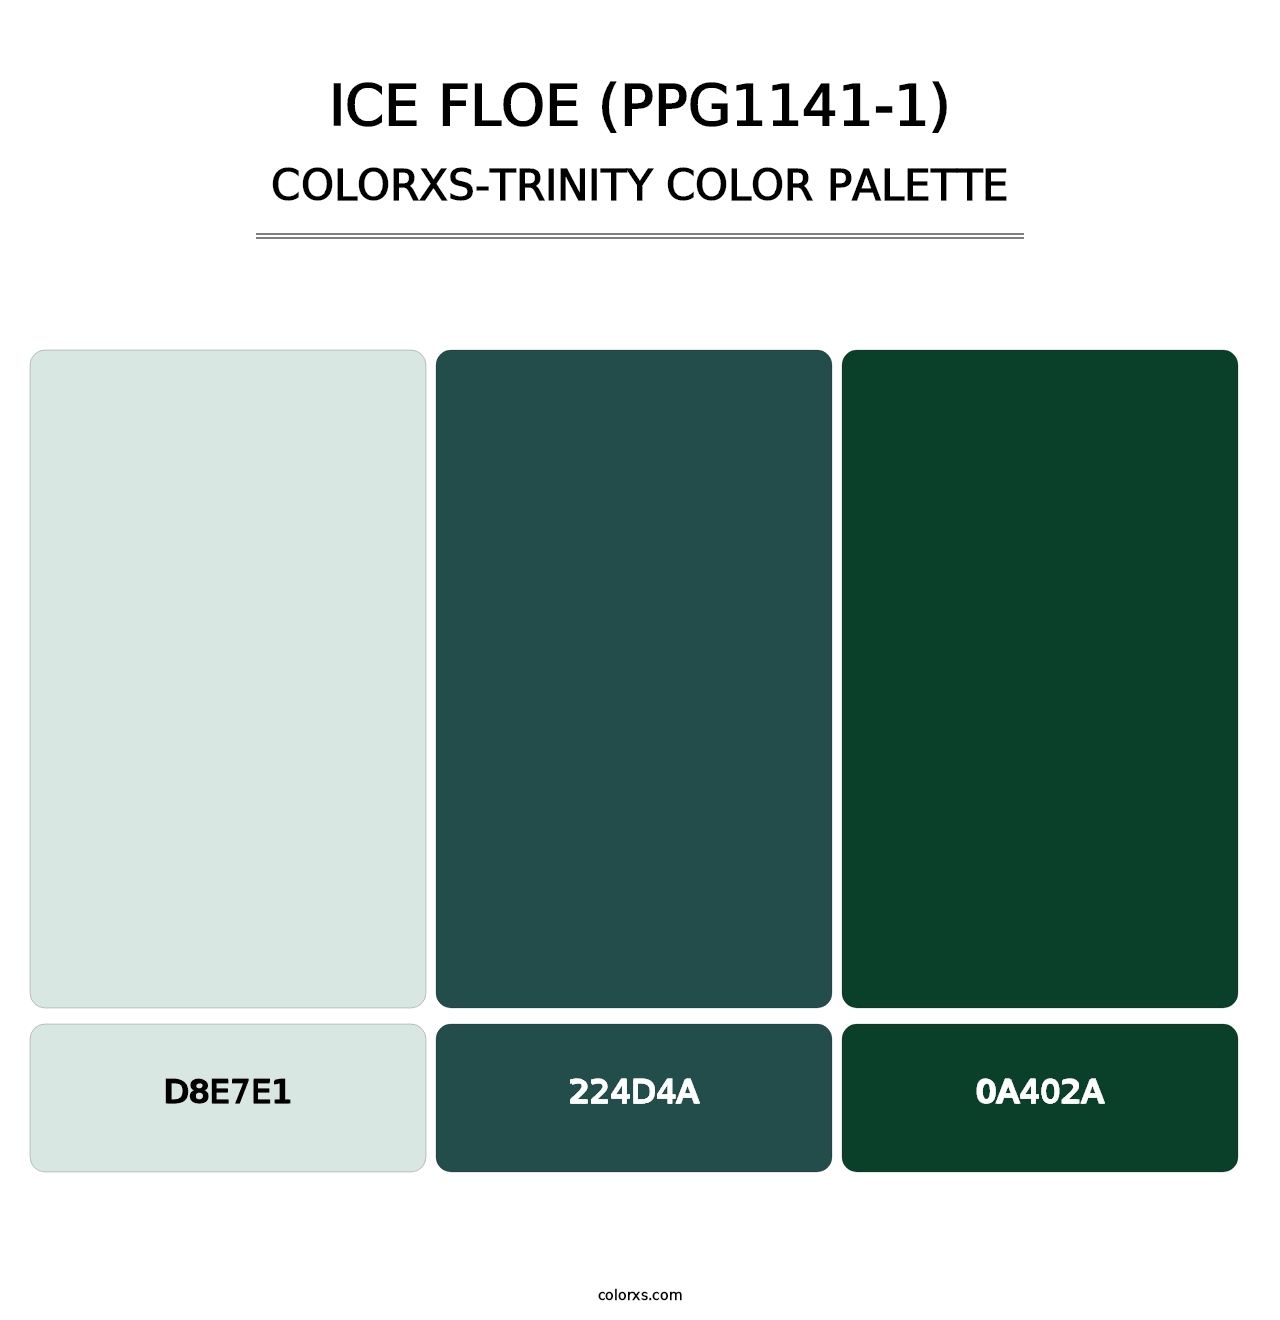 Ice Floe (PPG1141-1) - Colorxs Trinity Palette